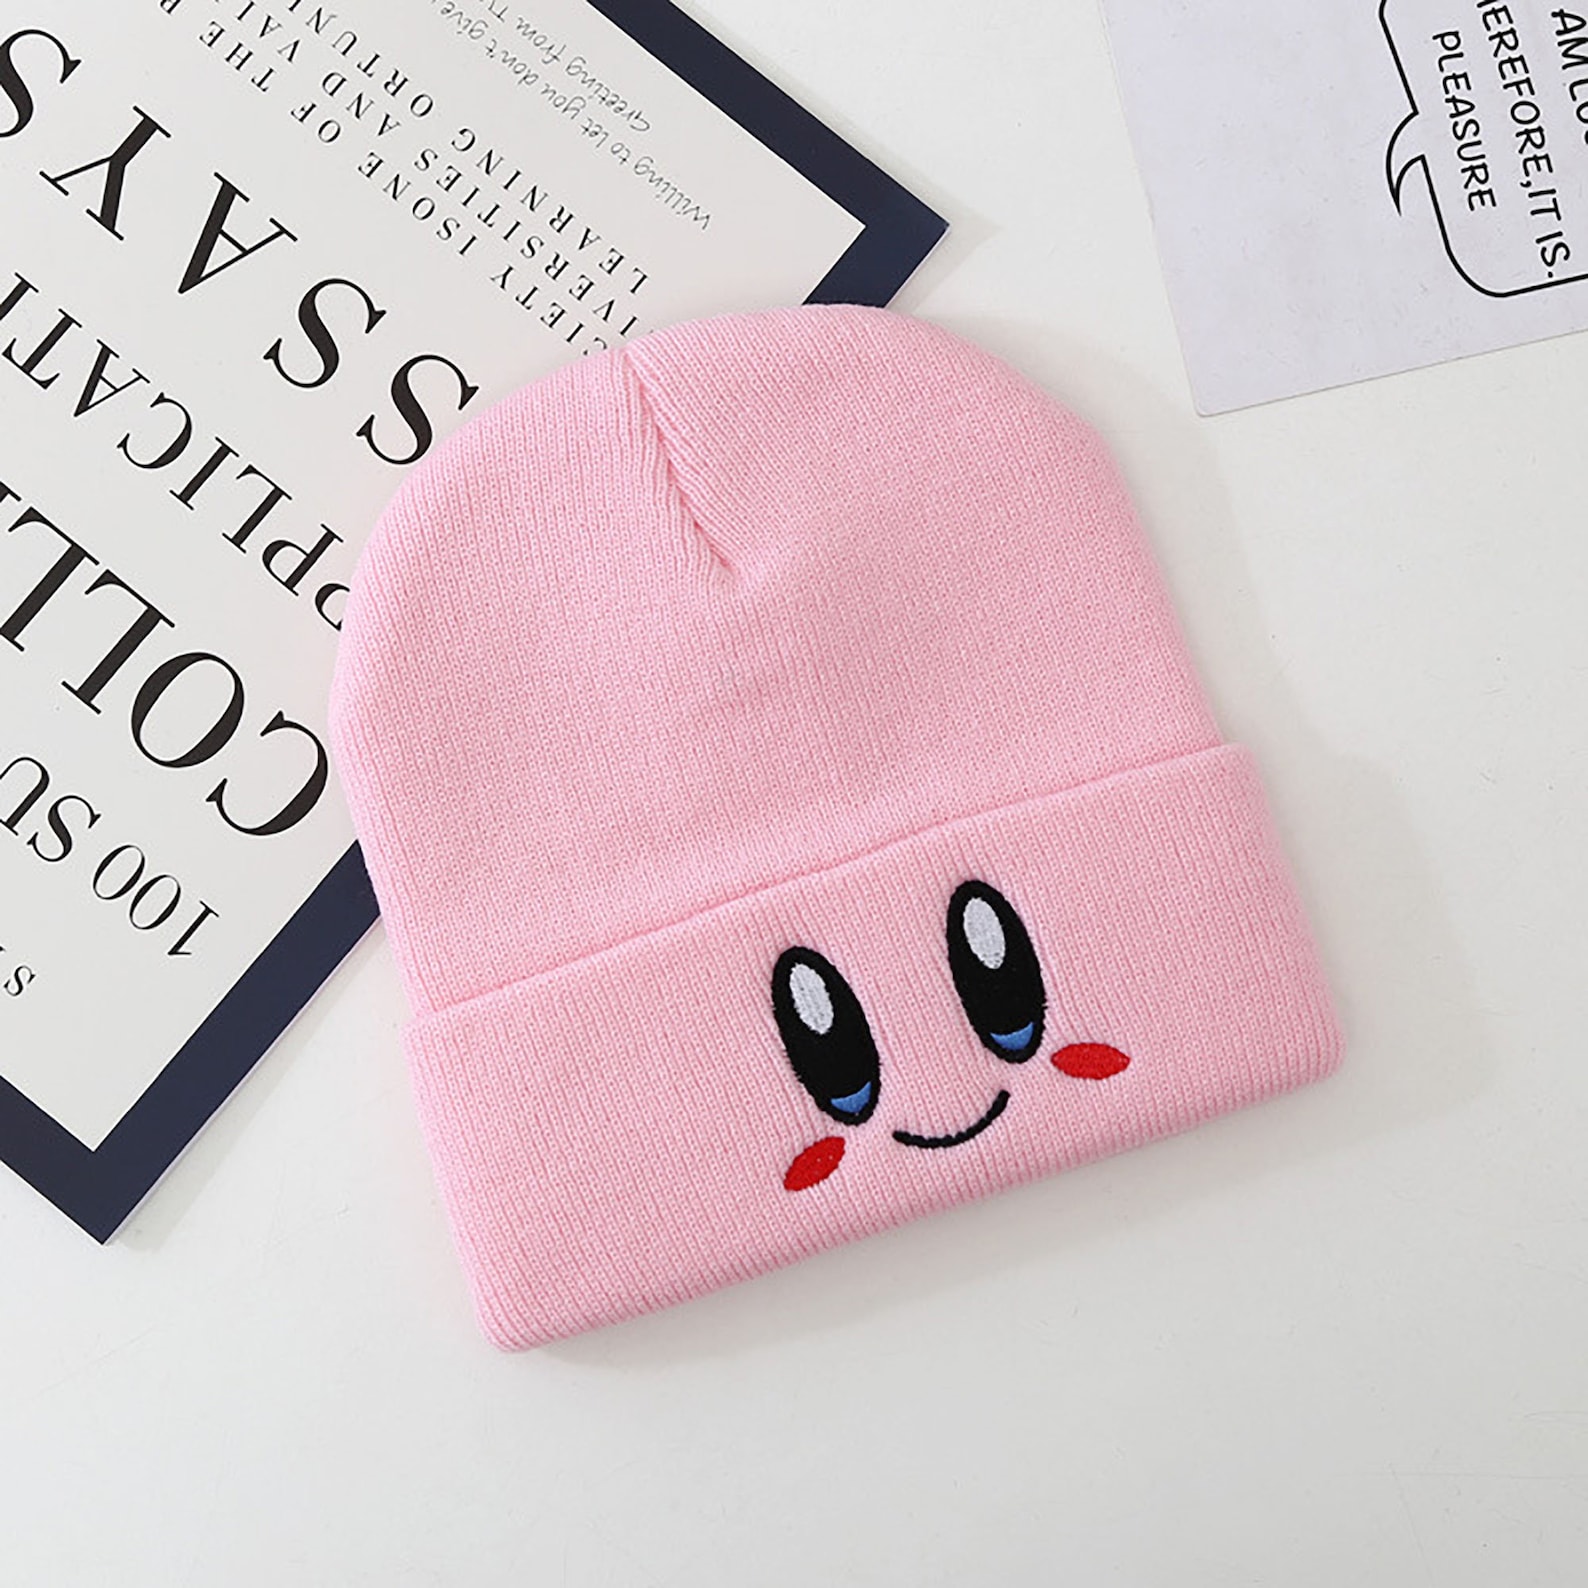 5 Colors Cute Warm Pink Knit Hatcute Casual Beanie Hat for | Etsy